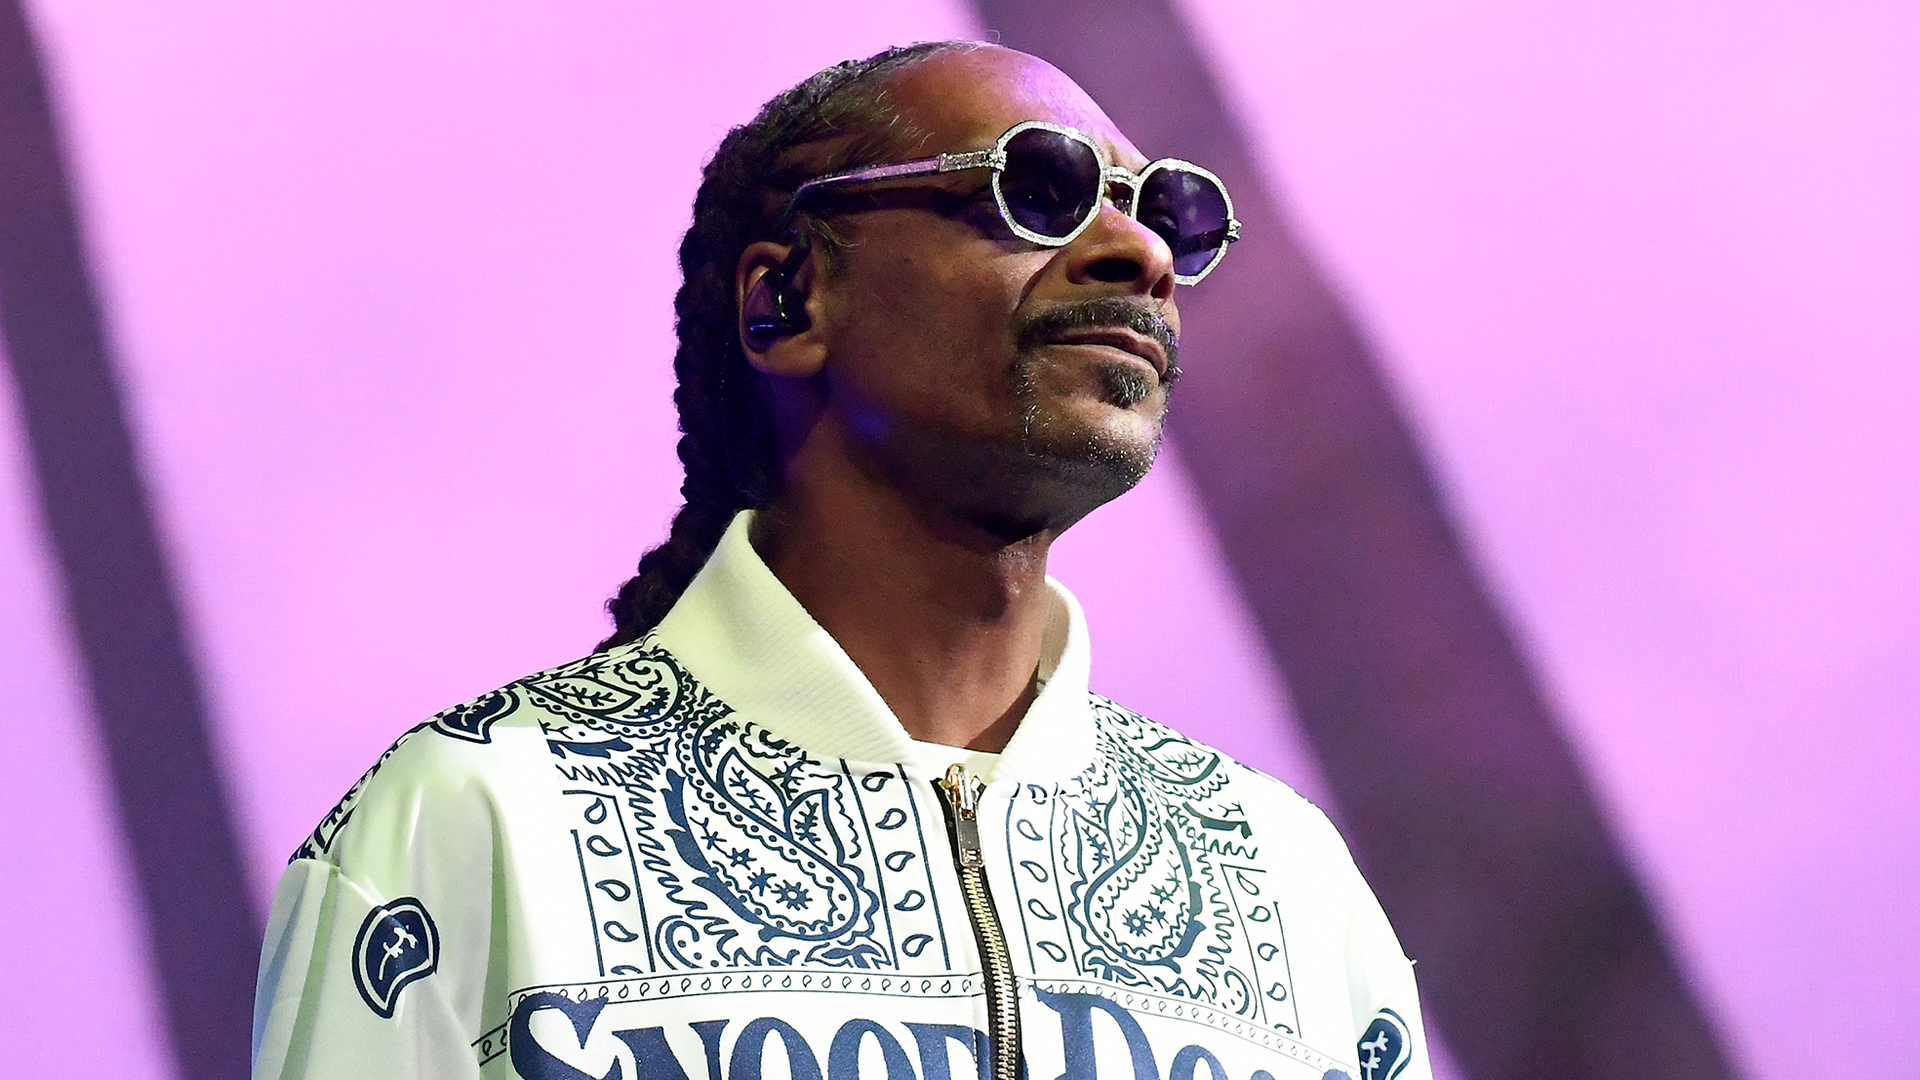 Snoop Dogg, Who Today Has An Estimated Net Worth Of $160M, Admitted That He Was Once Advised To File For Bankruptcy